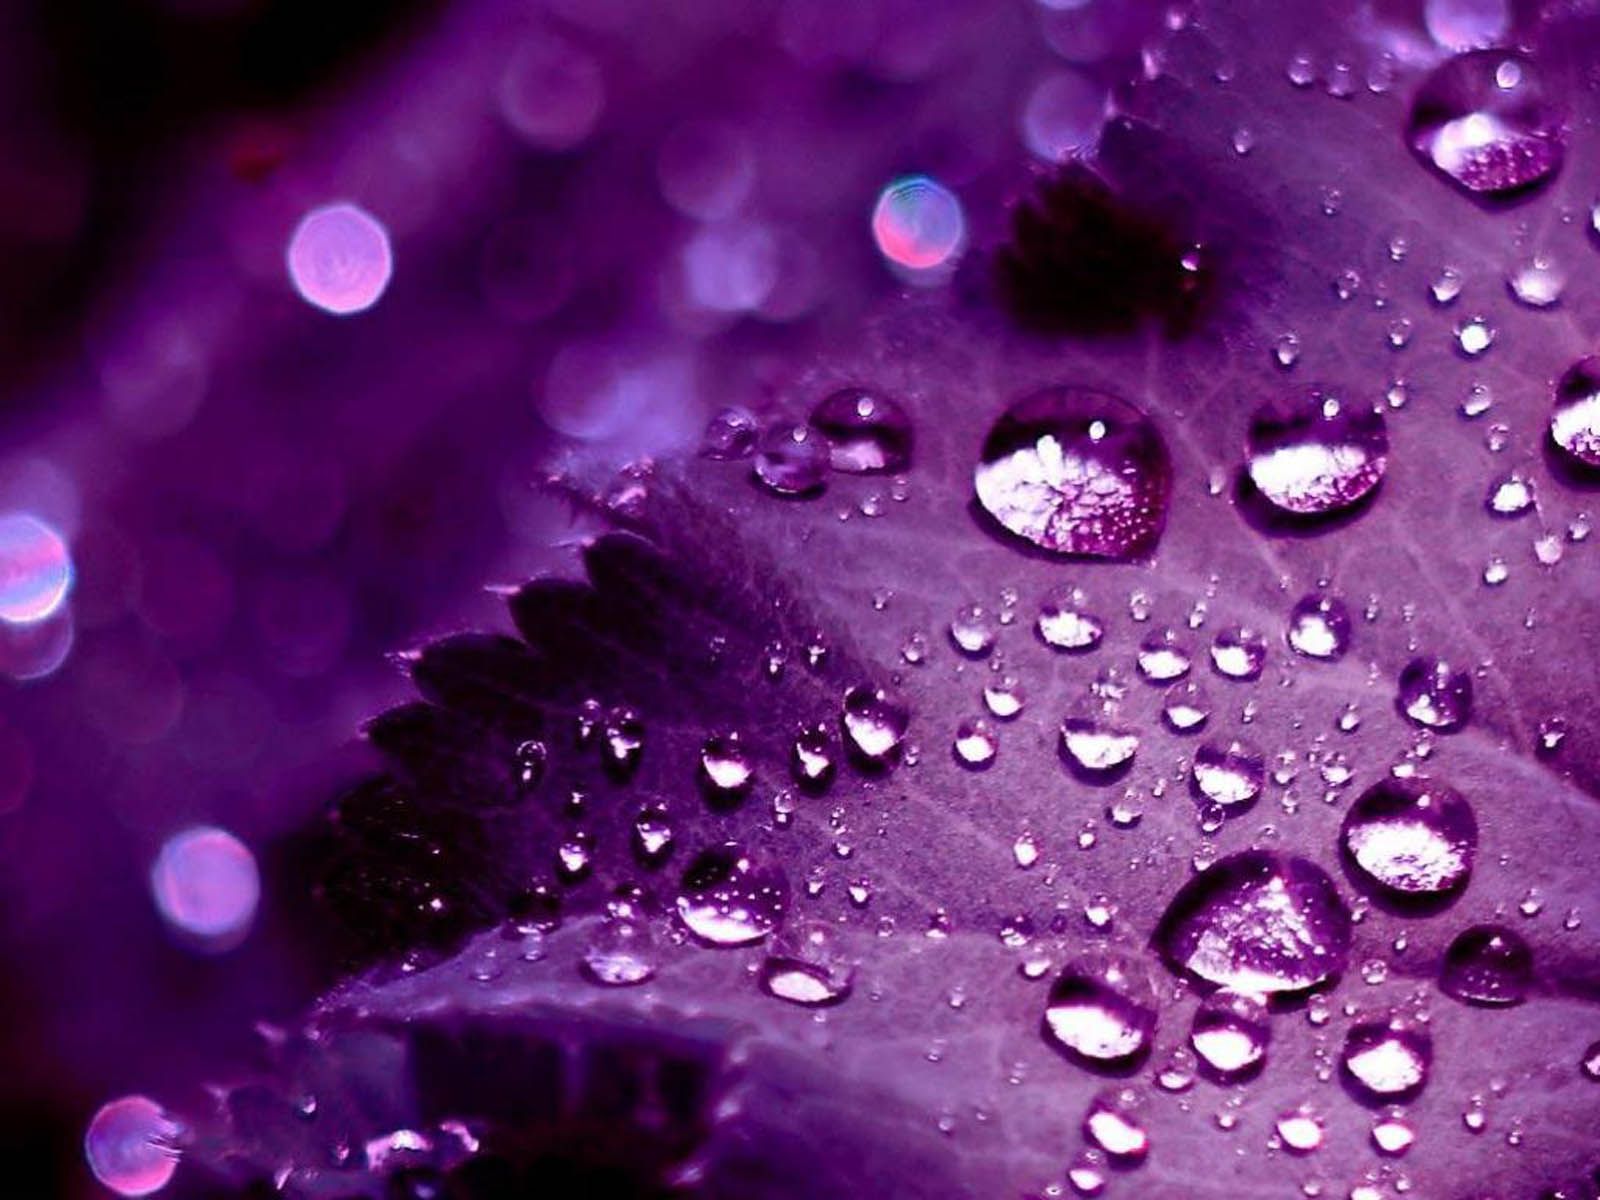 wallpapers for pretty purple backgrounds tumblr-1 | HD Wallpapers ...